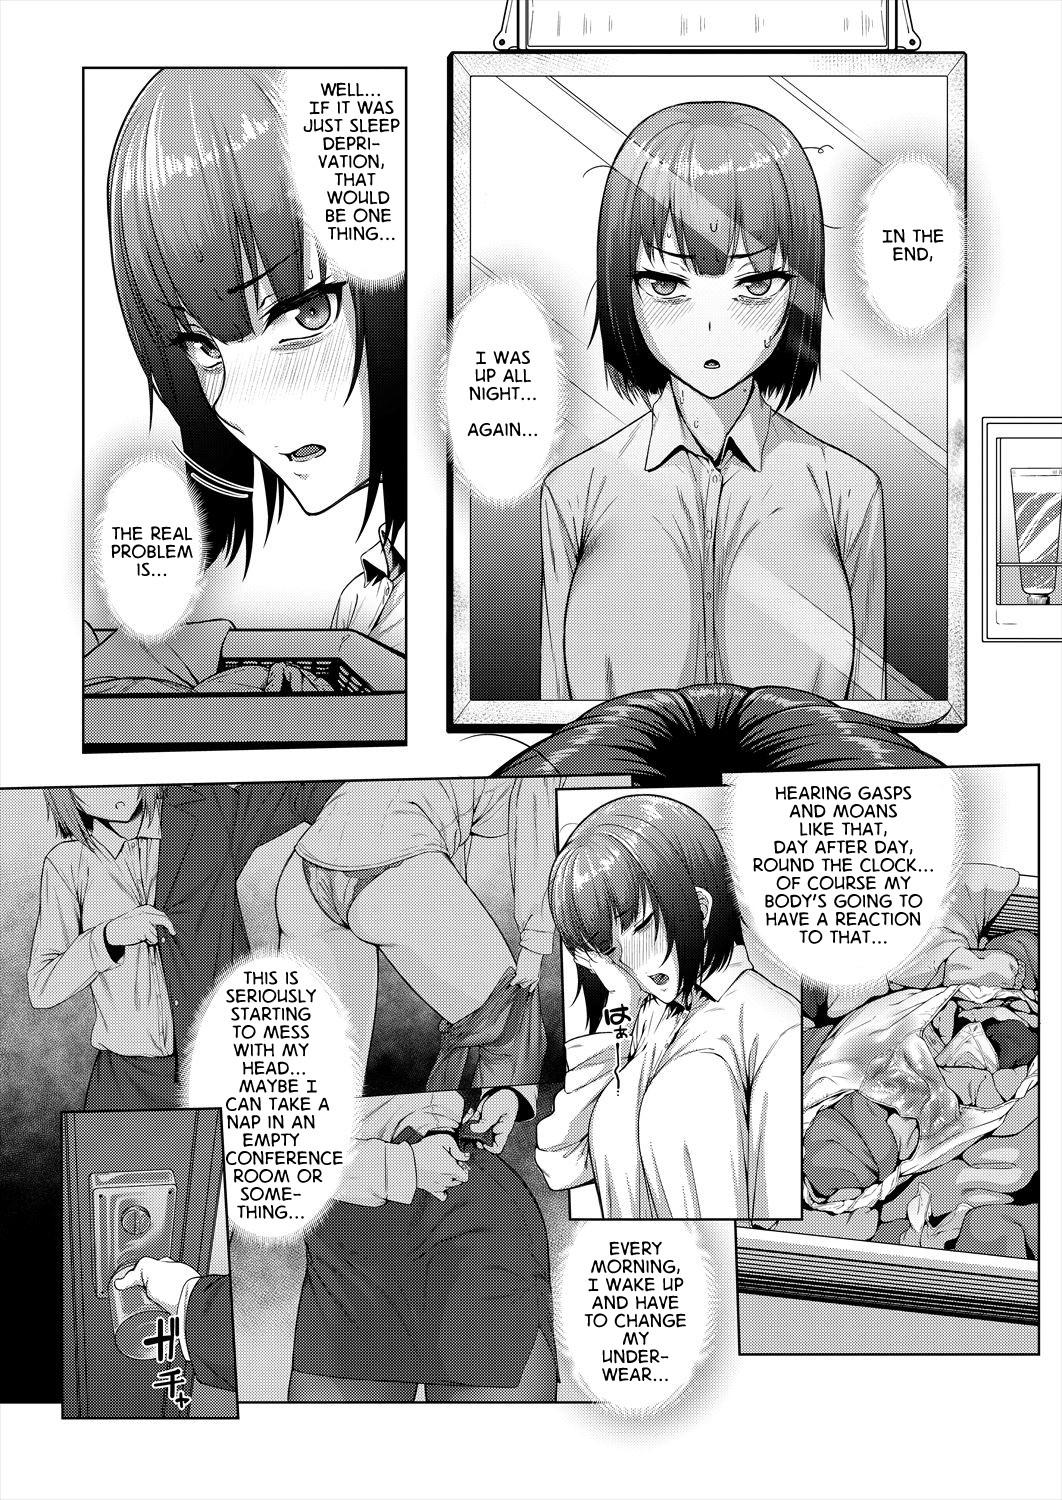 Gorgeous Kankyouon Ch. 1 | Banging Ambience Ch. 1 - Original Horny - Page 4